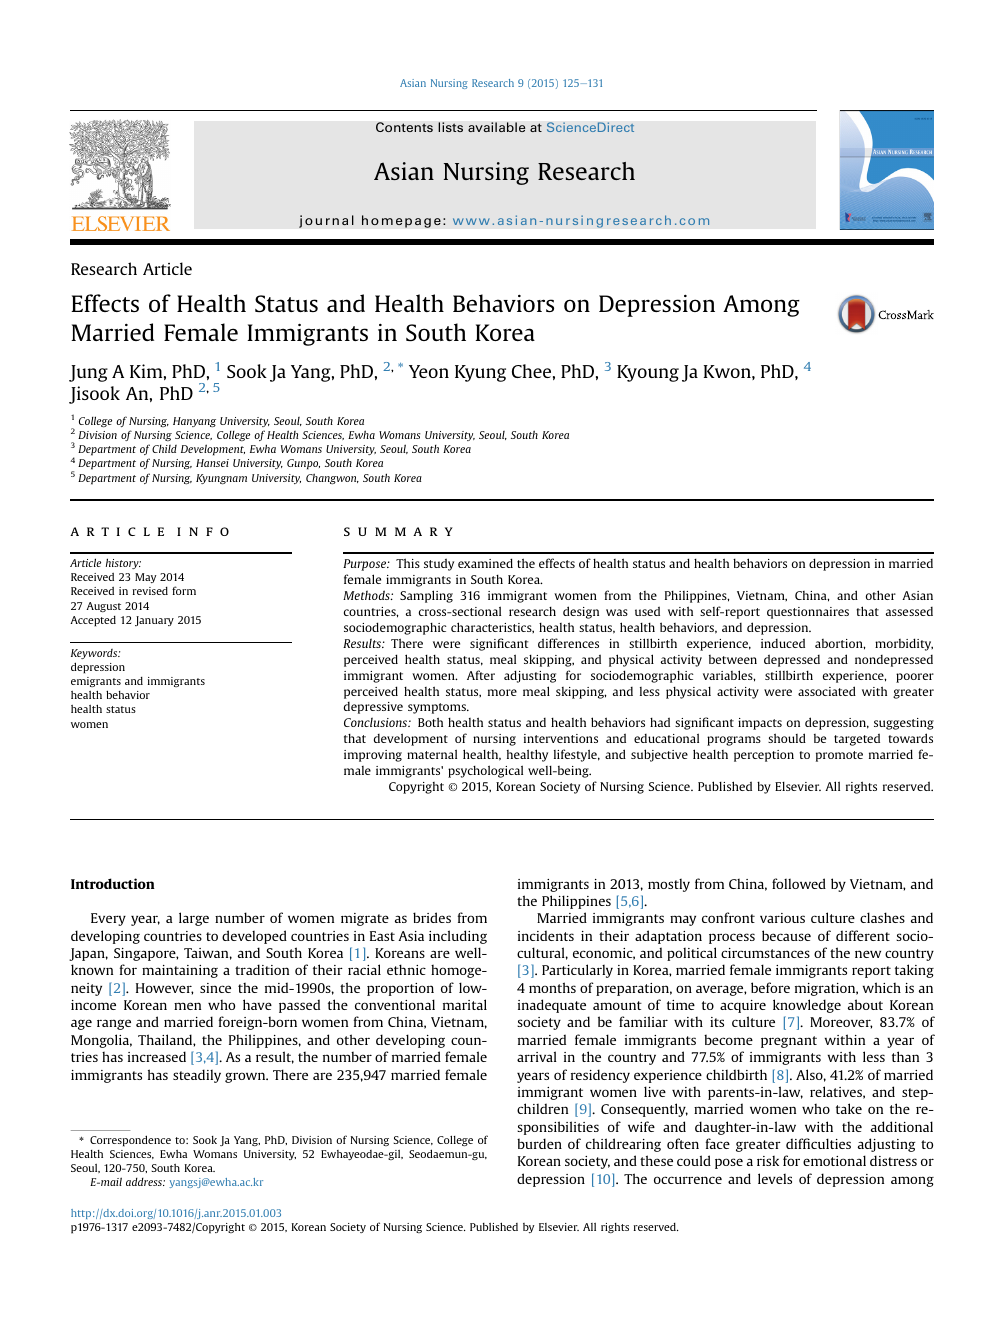 Korean public opinion on alcohol control policy: A cross-sectional  International Alcohol Control study - ScienceDirect